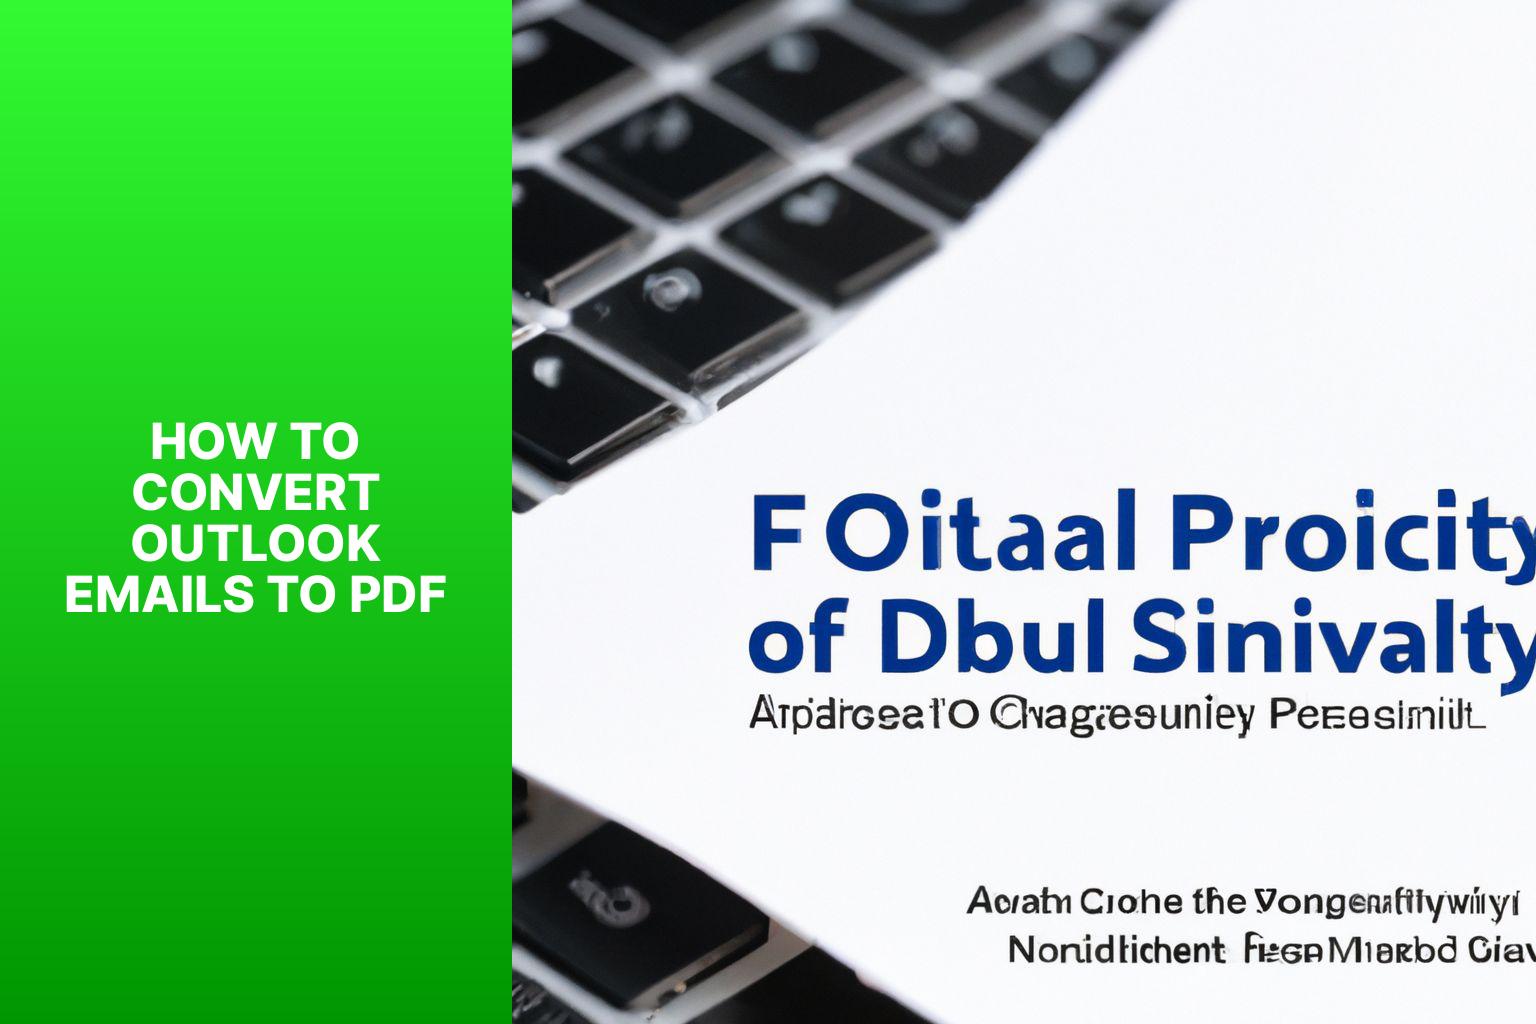 The Ultimate Guide: How to Convert Outlook Emails to PDF Easily